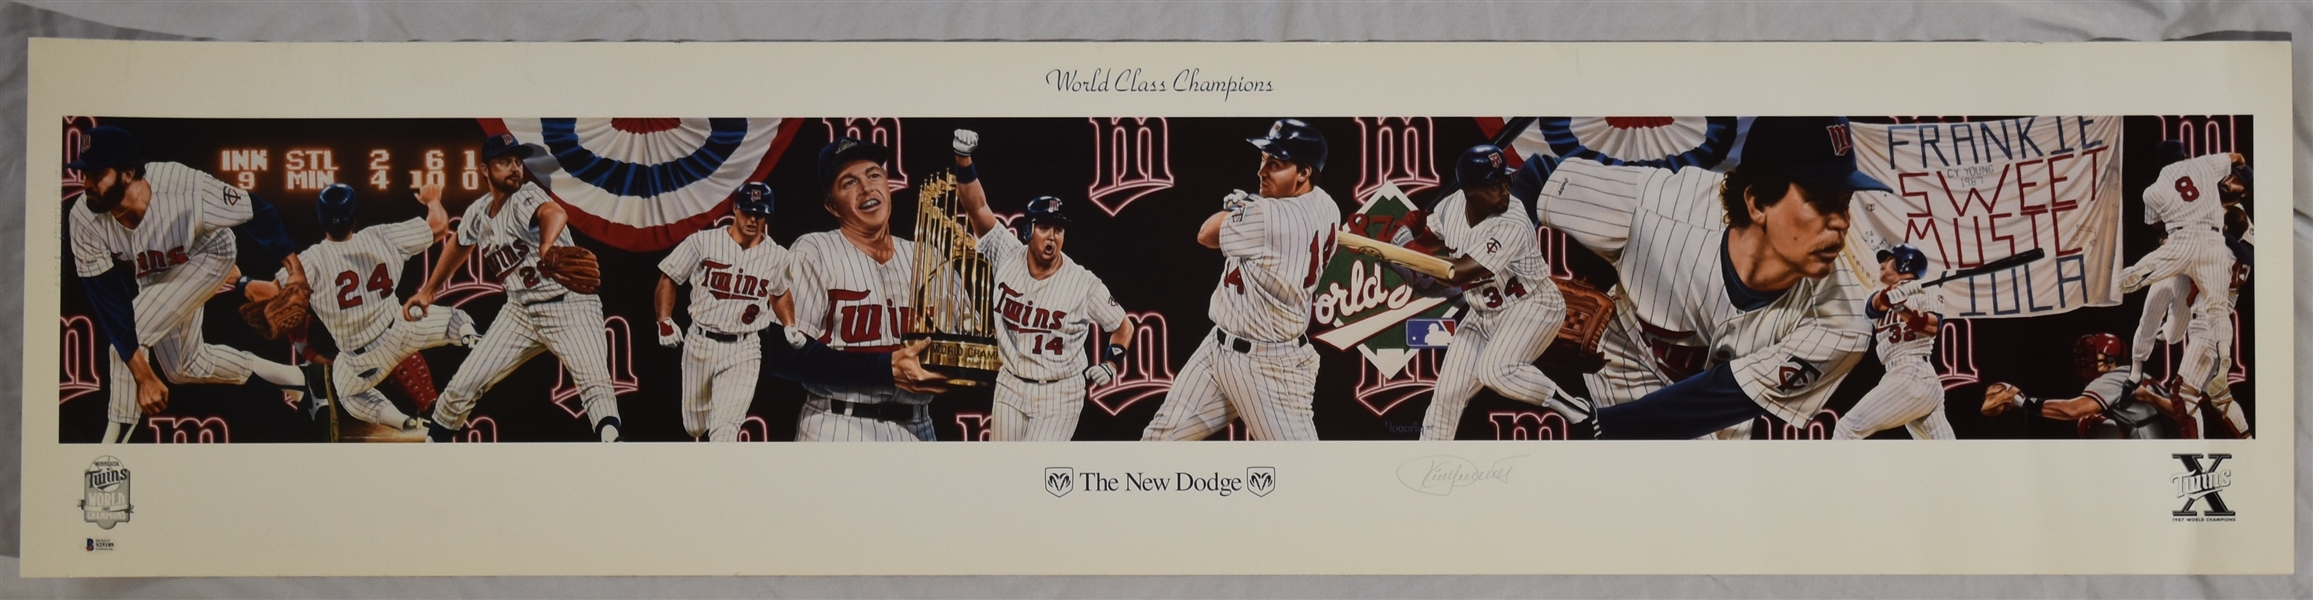 Kirby Puckett Autographed Terrance Fogarty "World Class Champions" Lithograph